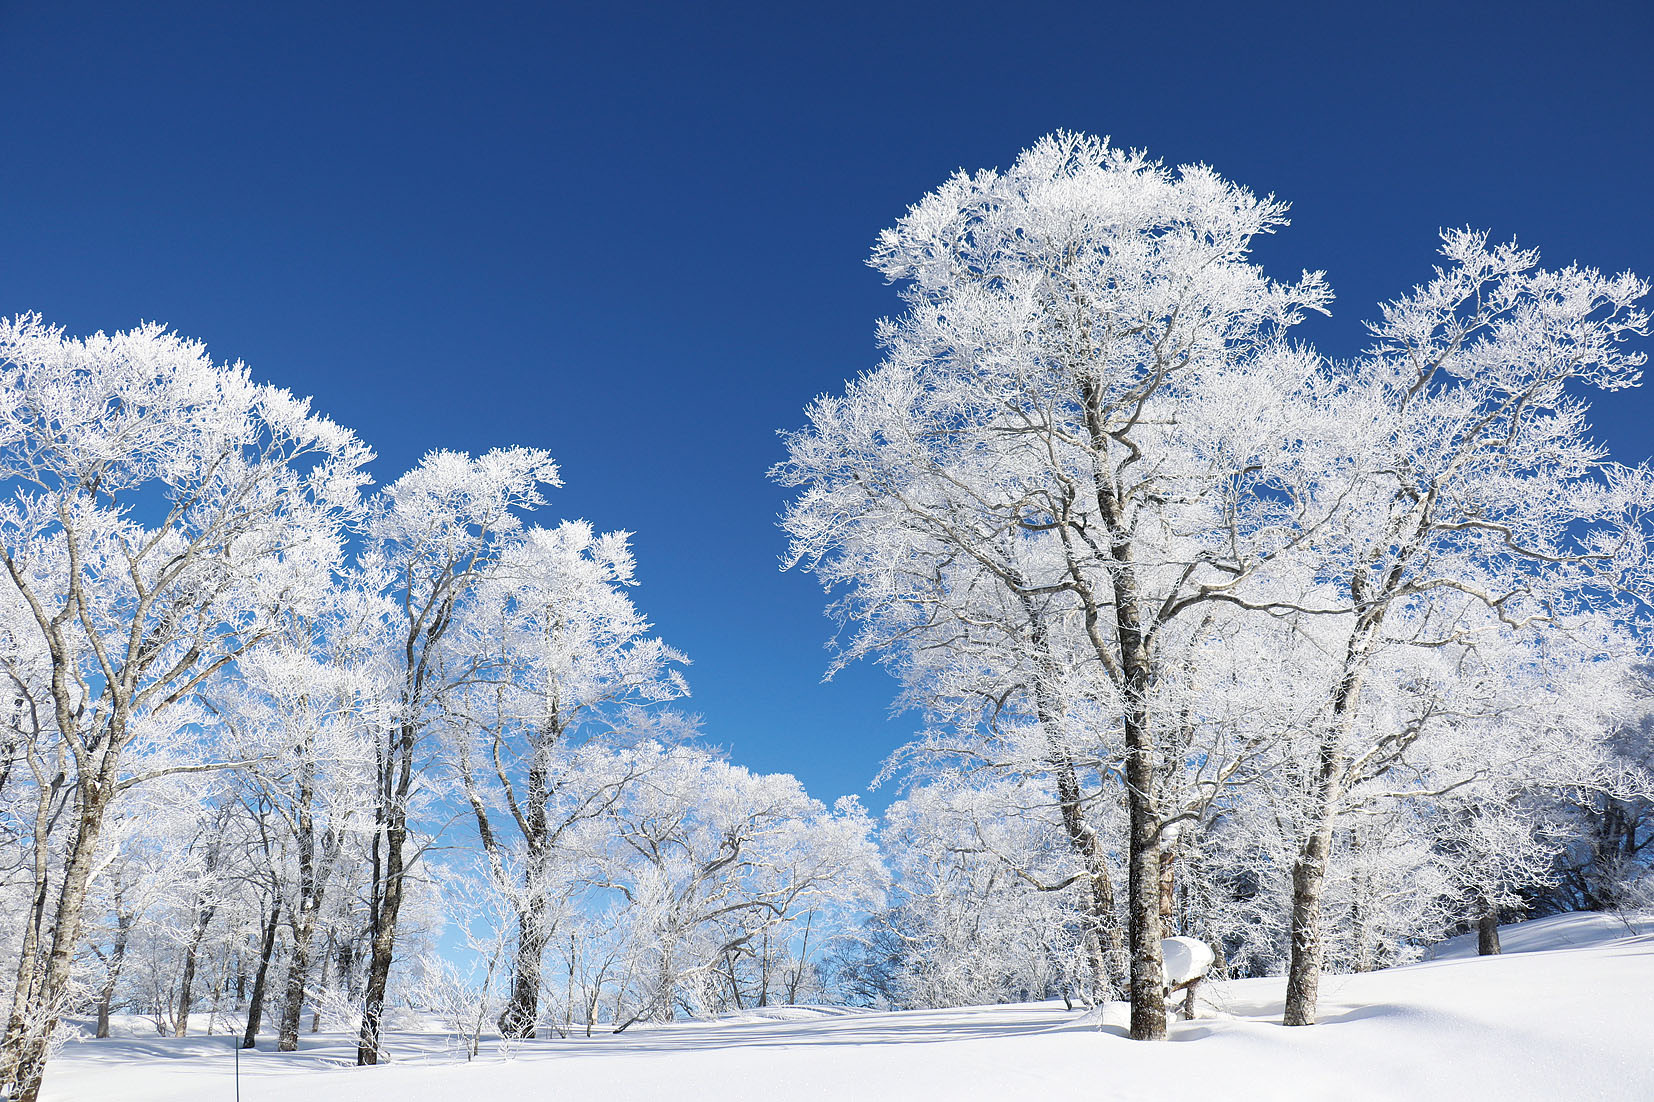 If you head a little towards the mountains, you can experience a fantastic winter scenery of snowy country.